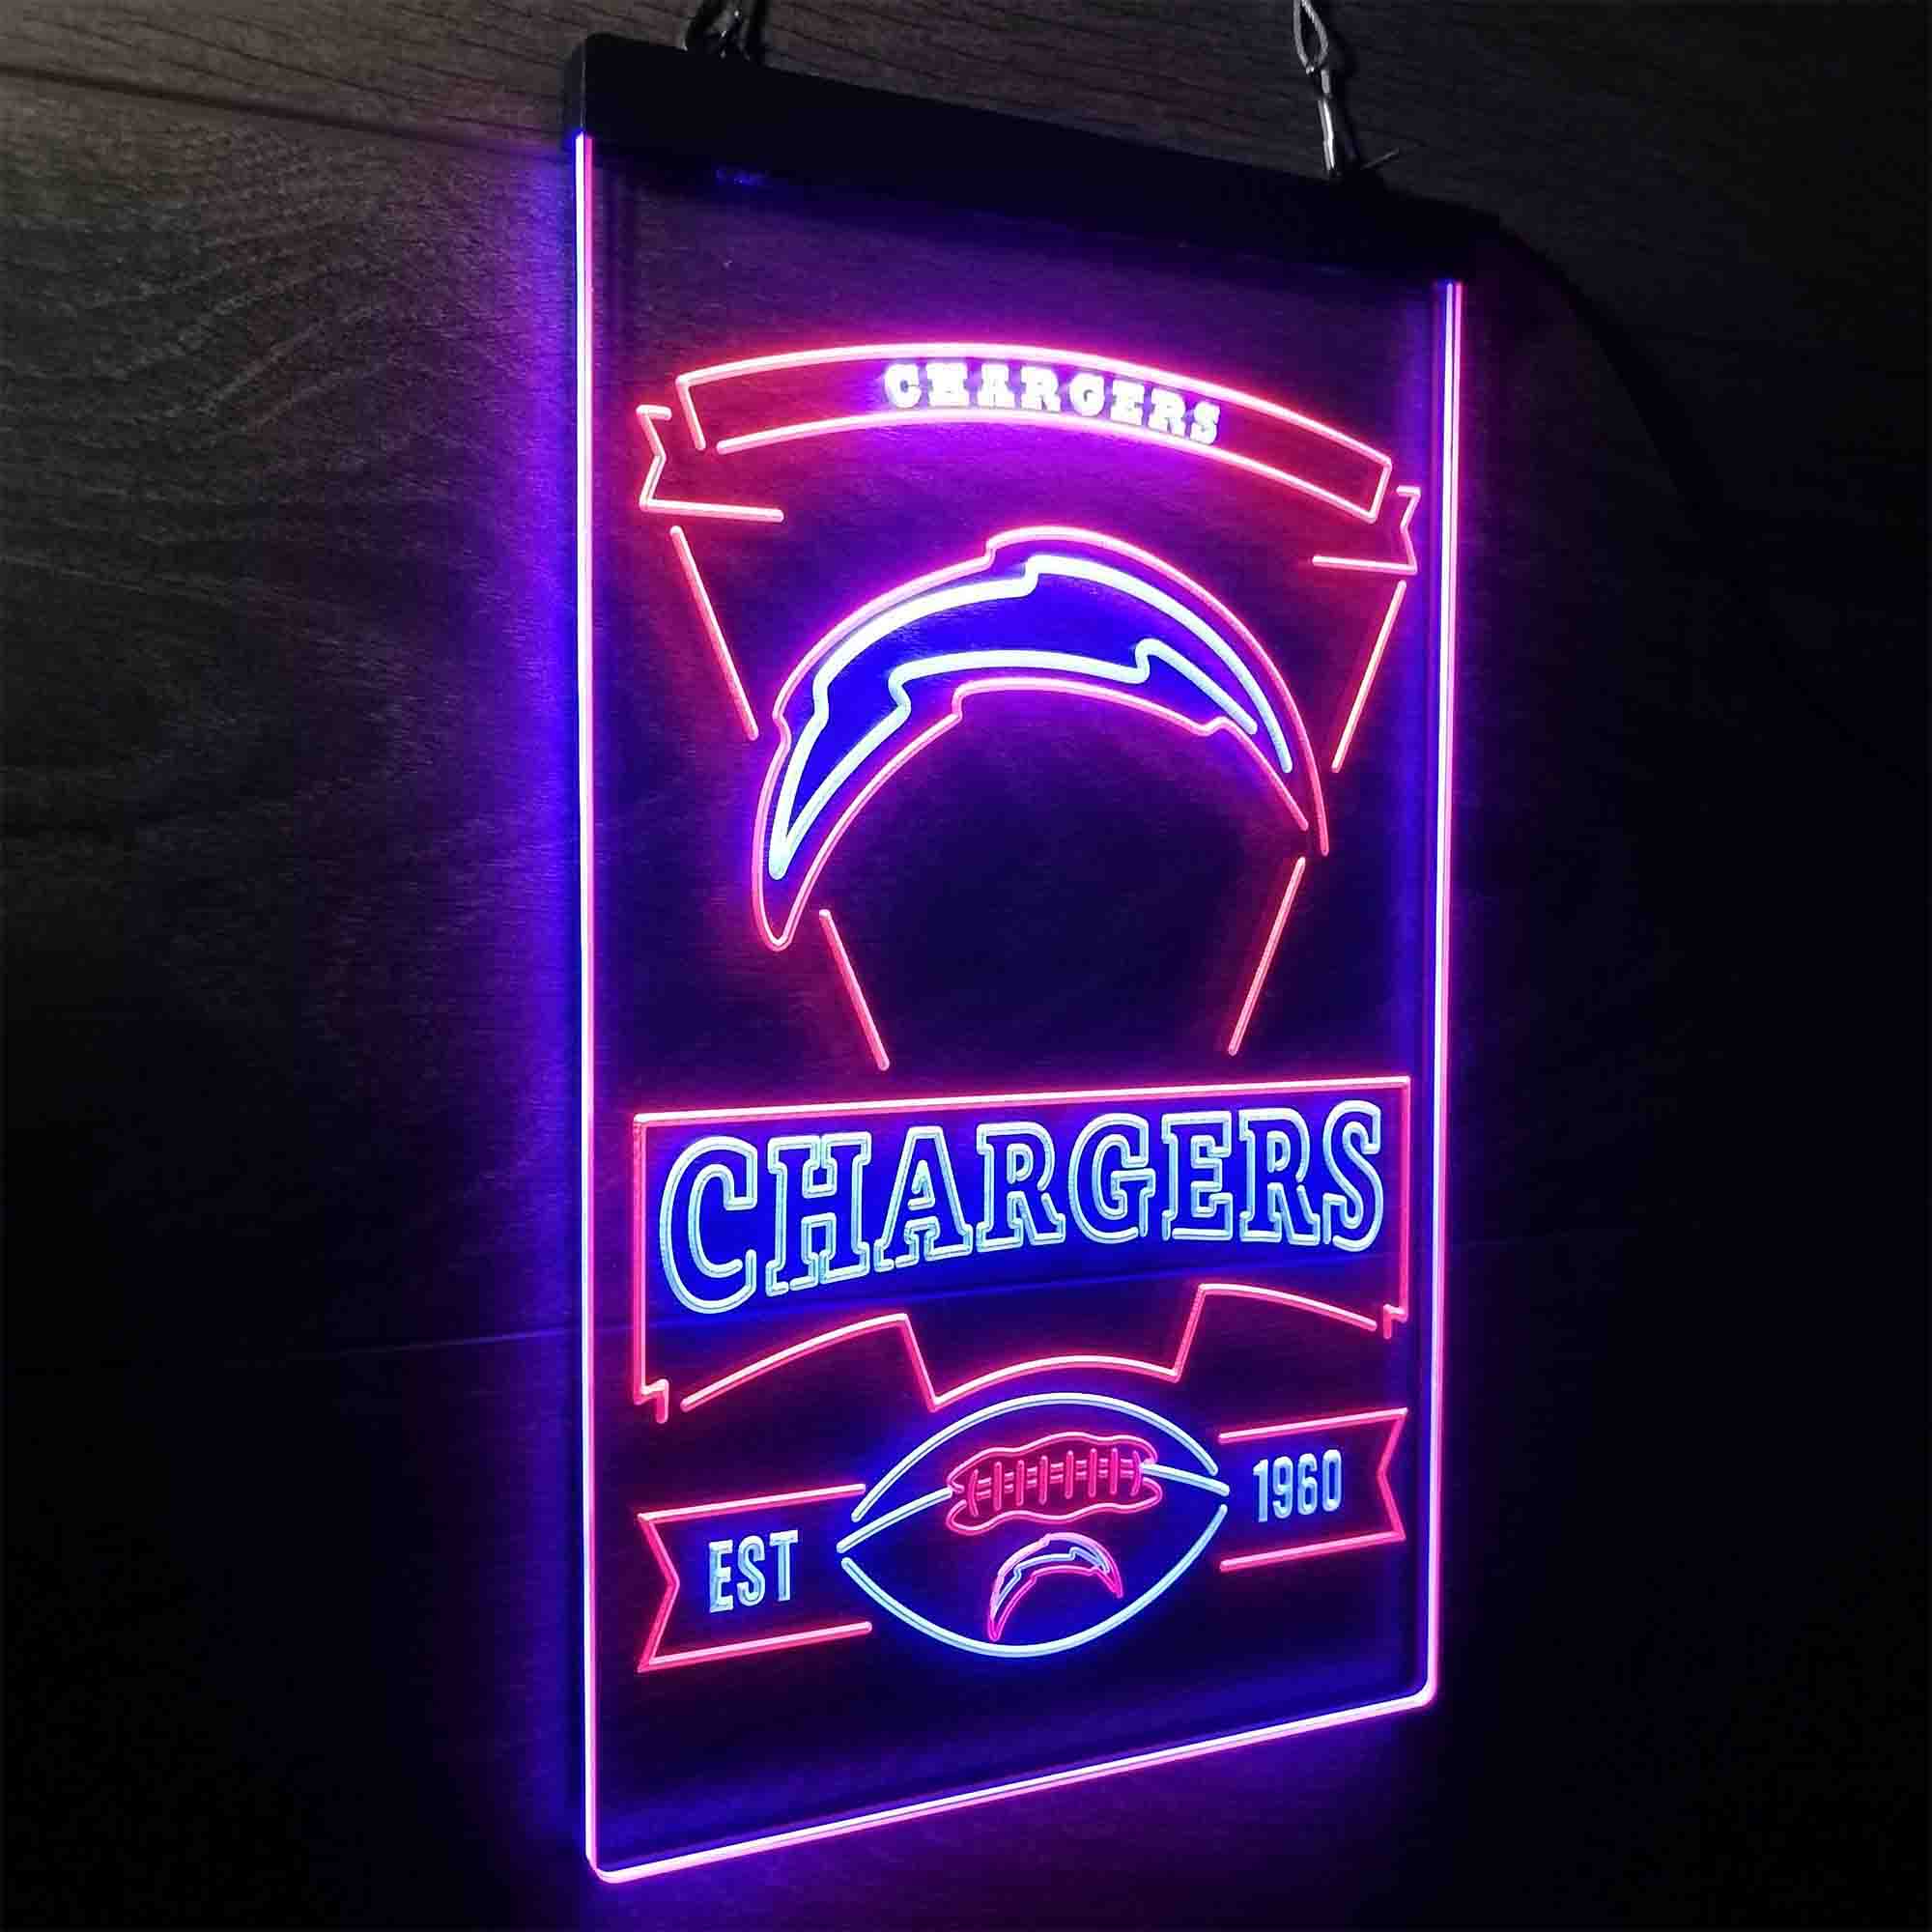 Los Angeles Chargers Est. 1960 LED Neon Sign